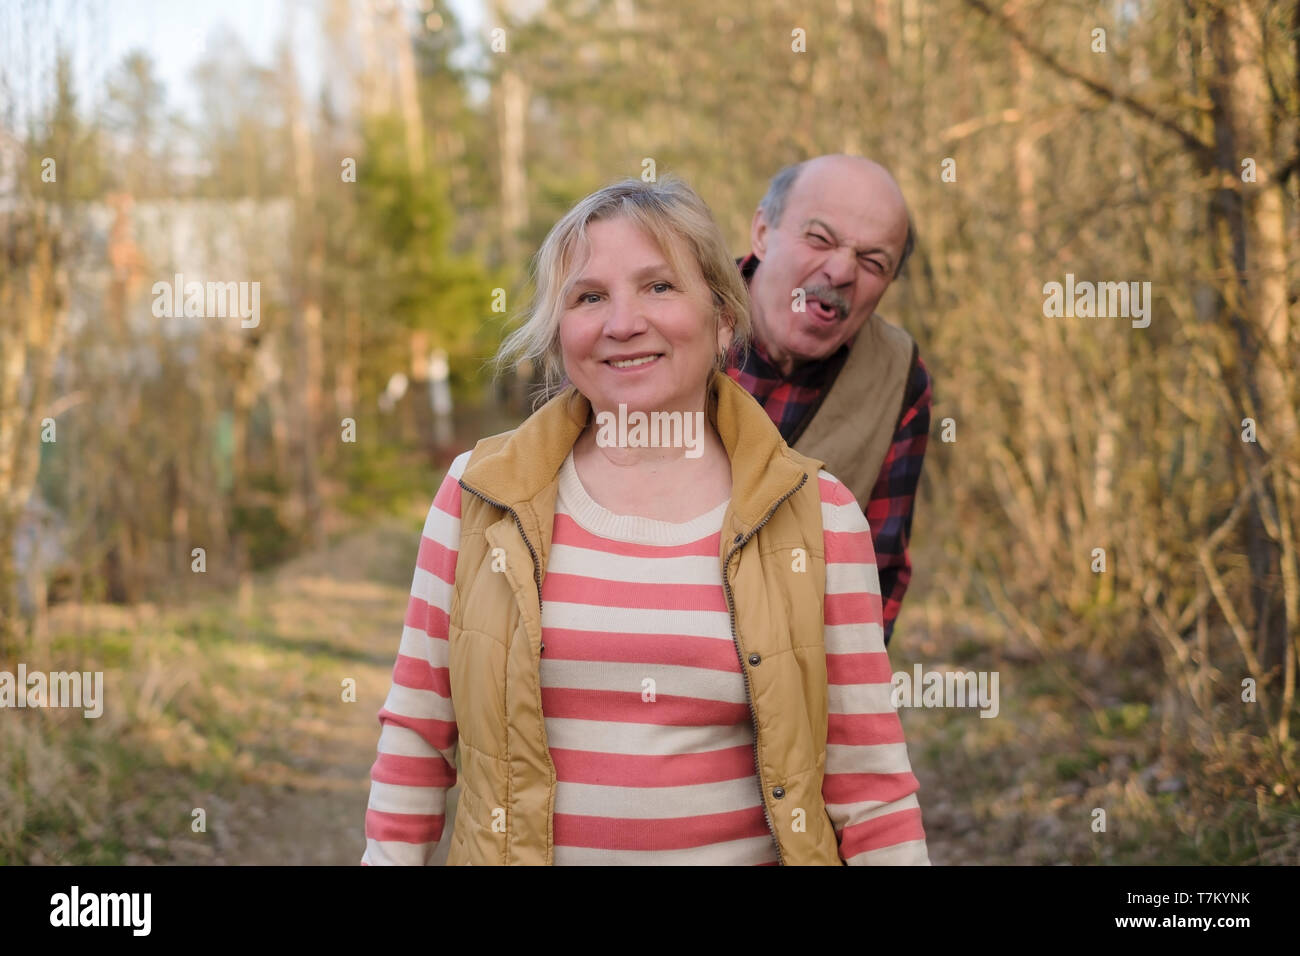 Mature woman smiling standing outdoor. Her husband teasing her showing tongue. Stock Photo